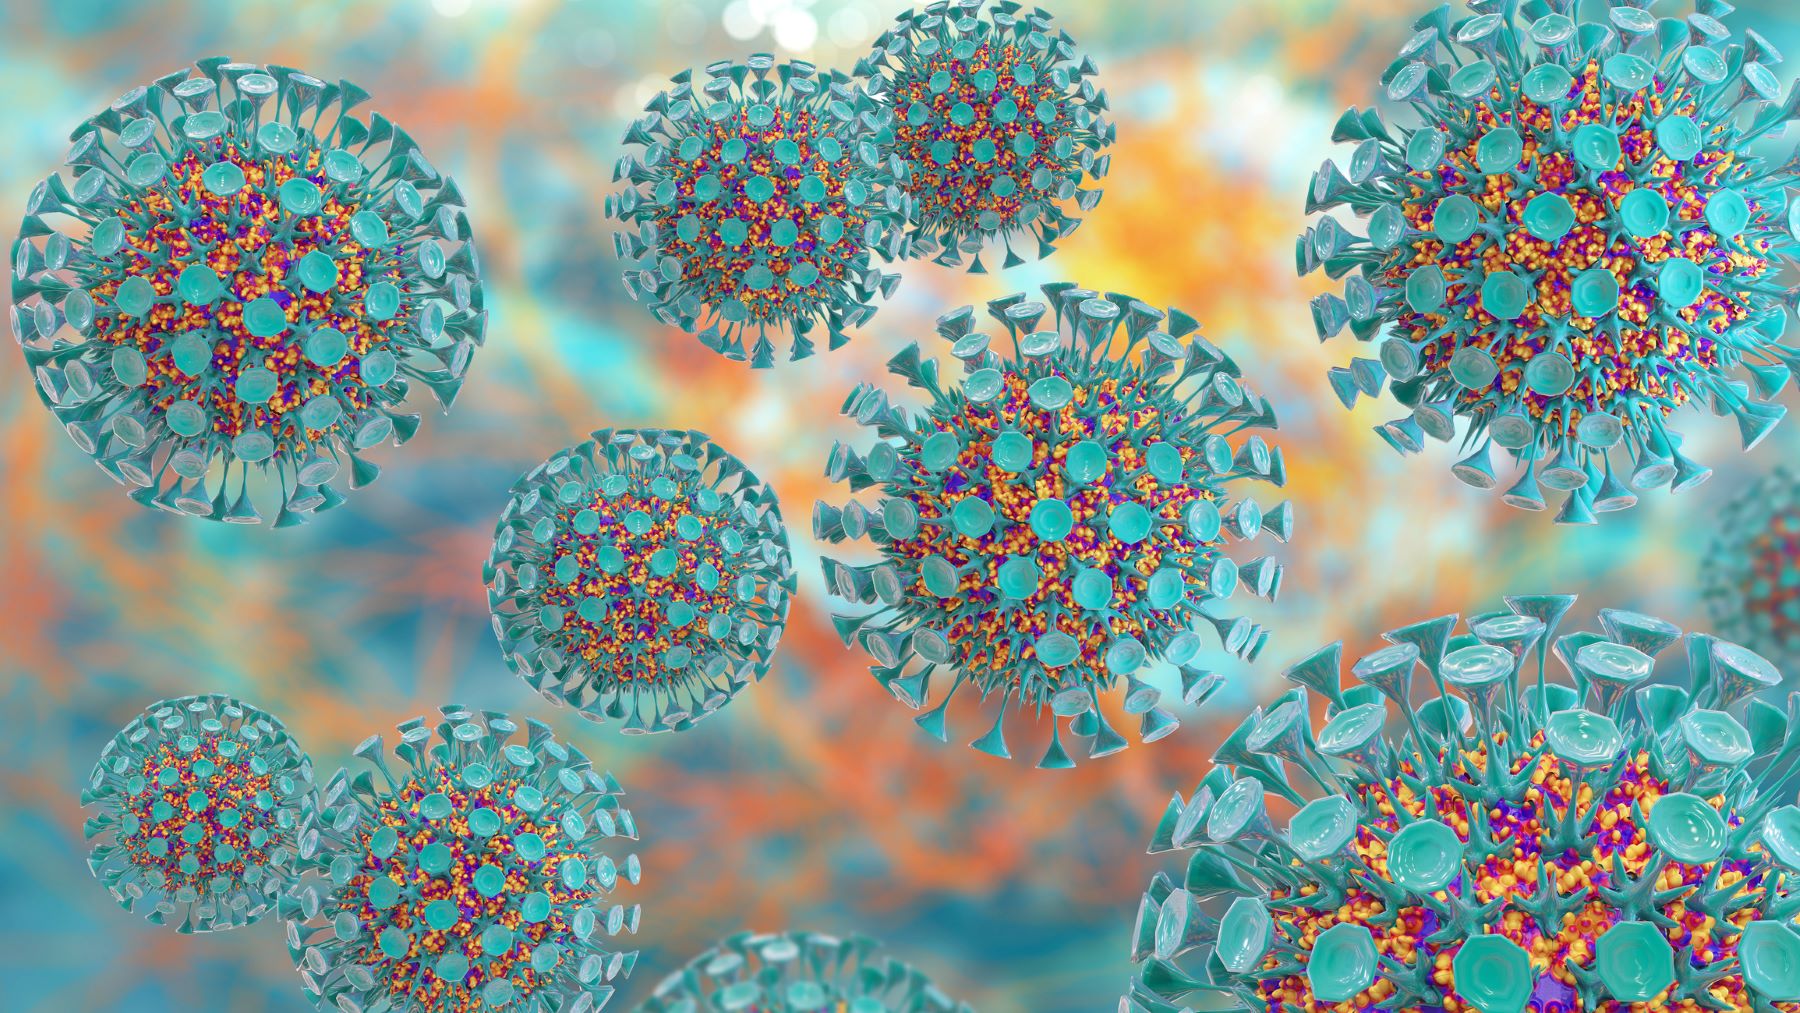 An artists impression of influenza molecules The molecules are blue and have multicolored centers 